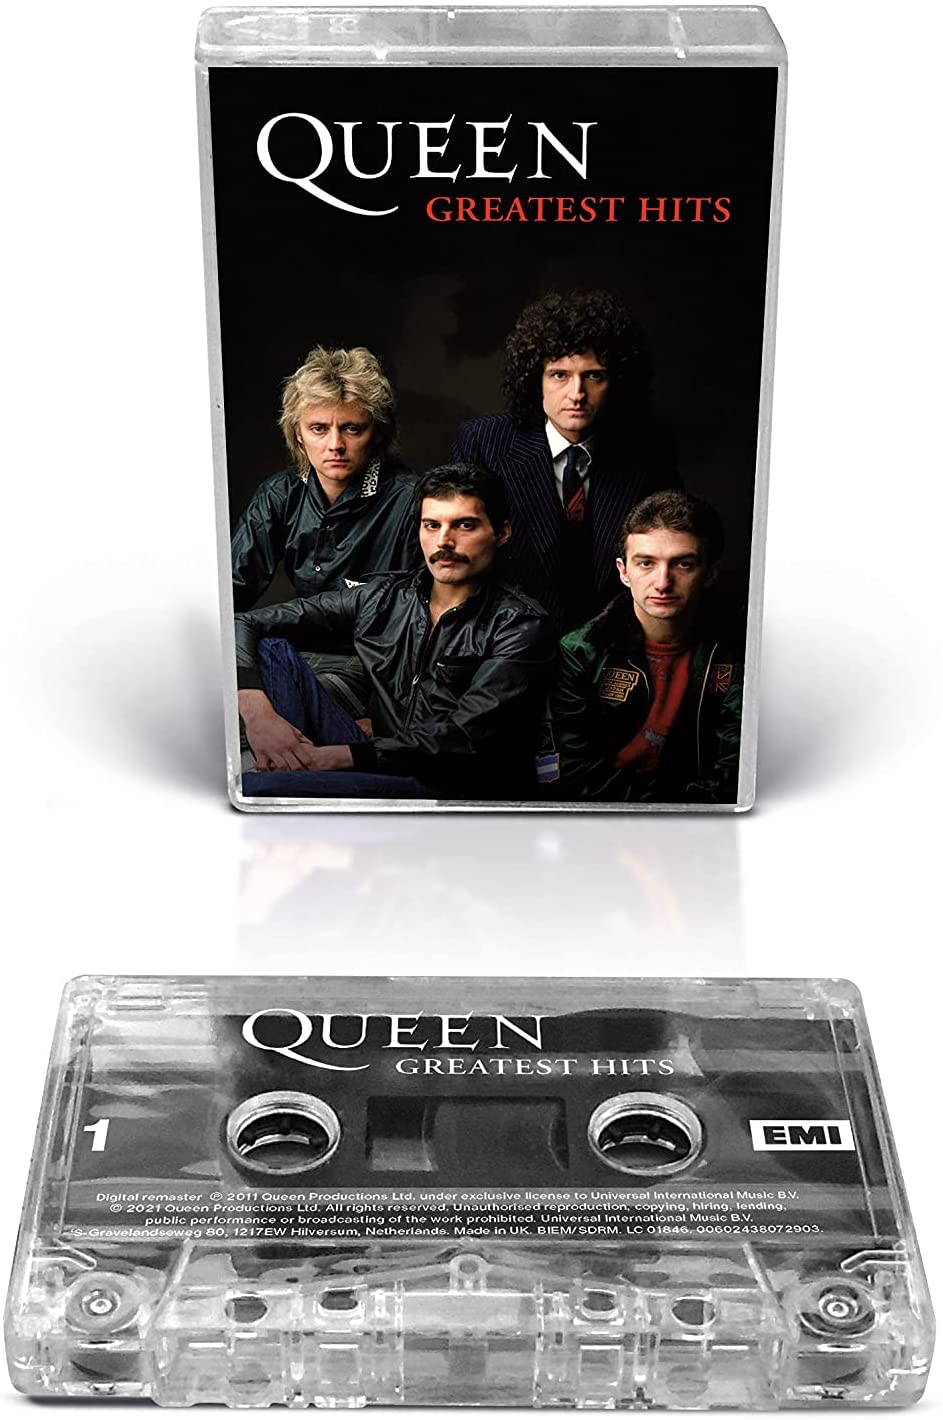 Greatest hits collection. Queen Greatest Hits 2 кассета. Диск кассета Queen. Queen - Greatest Hits. Queen Greatest Hits 1.